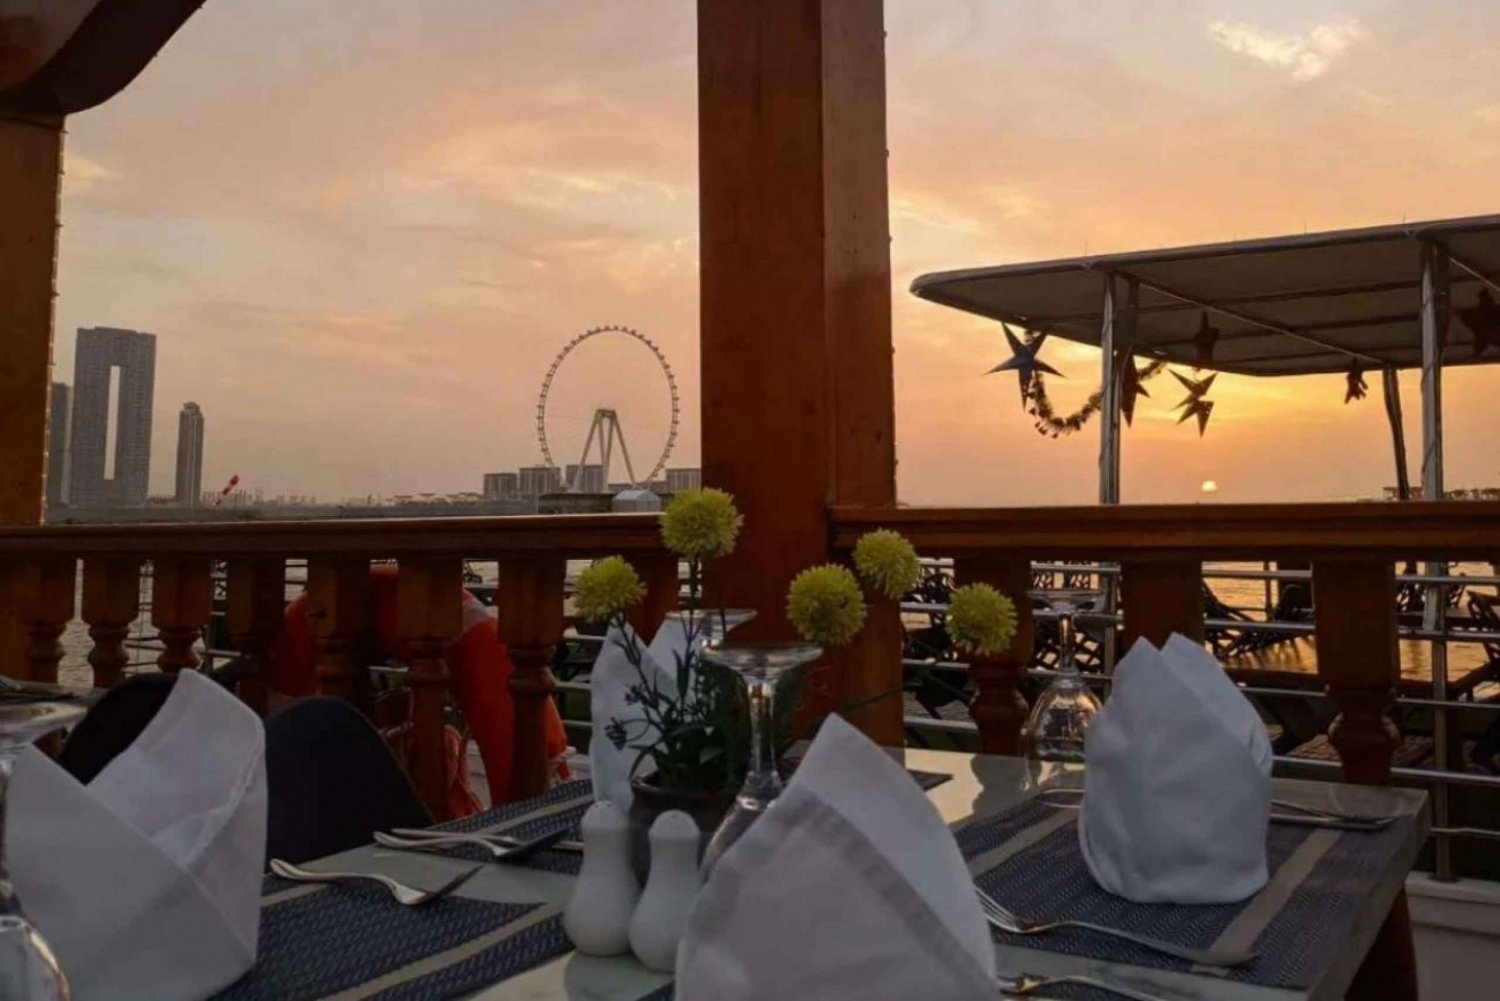 Dubai: Marina Dhow Dinner Cruise With Private transfer